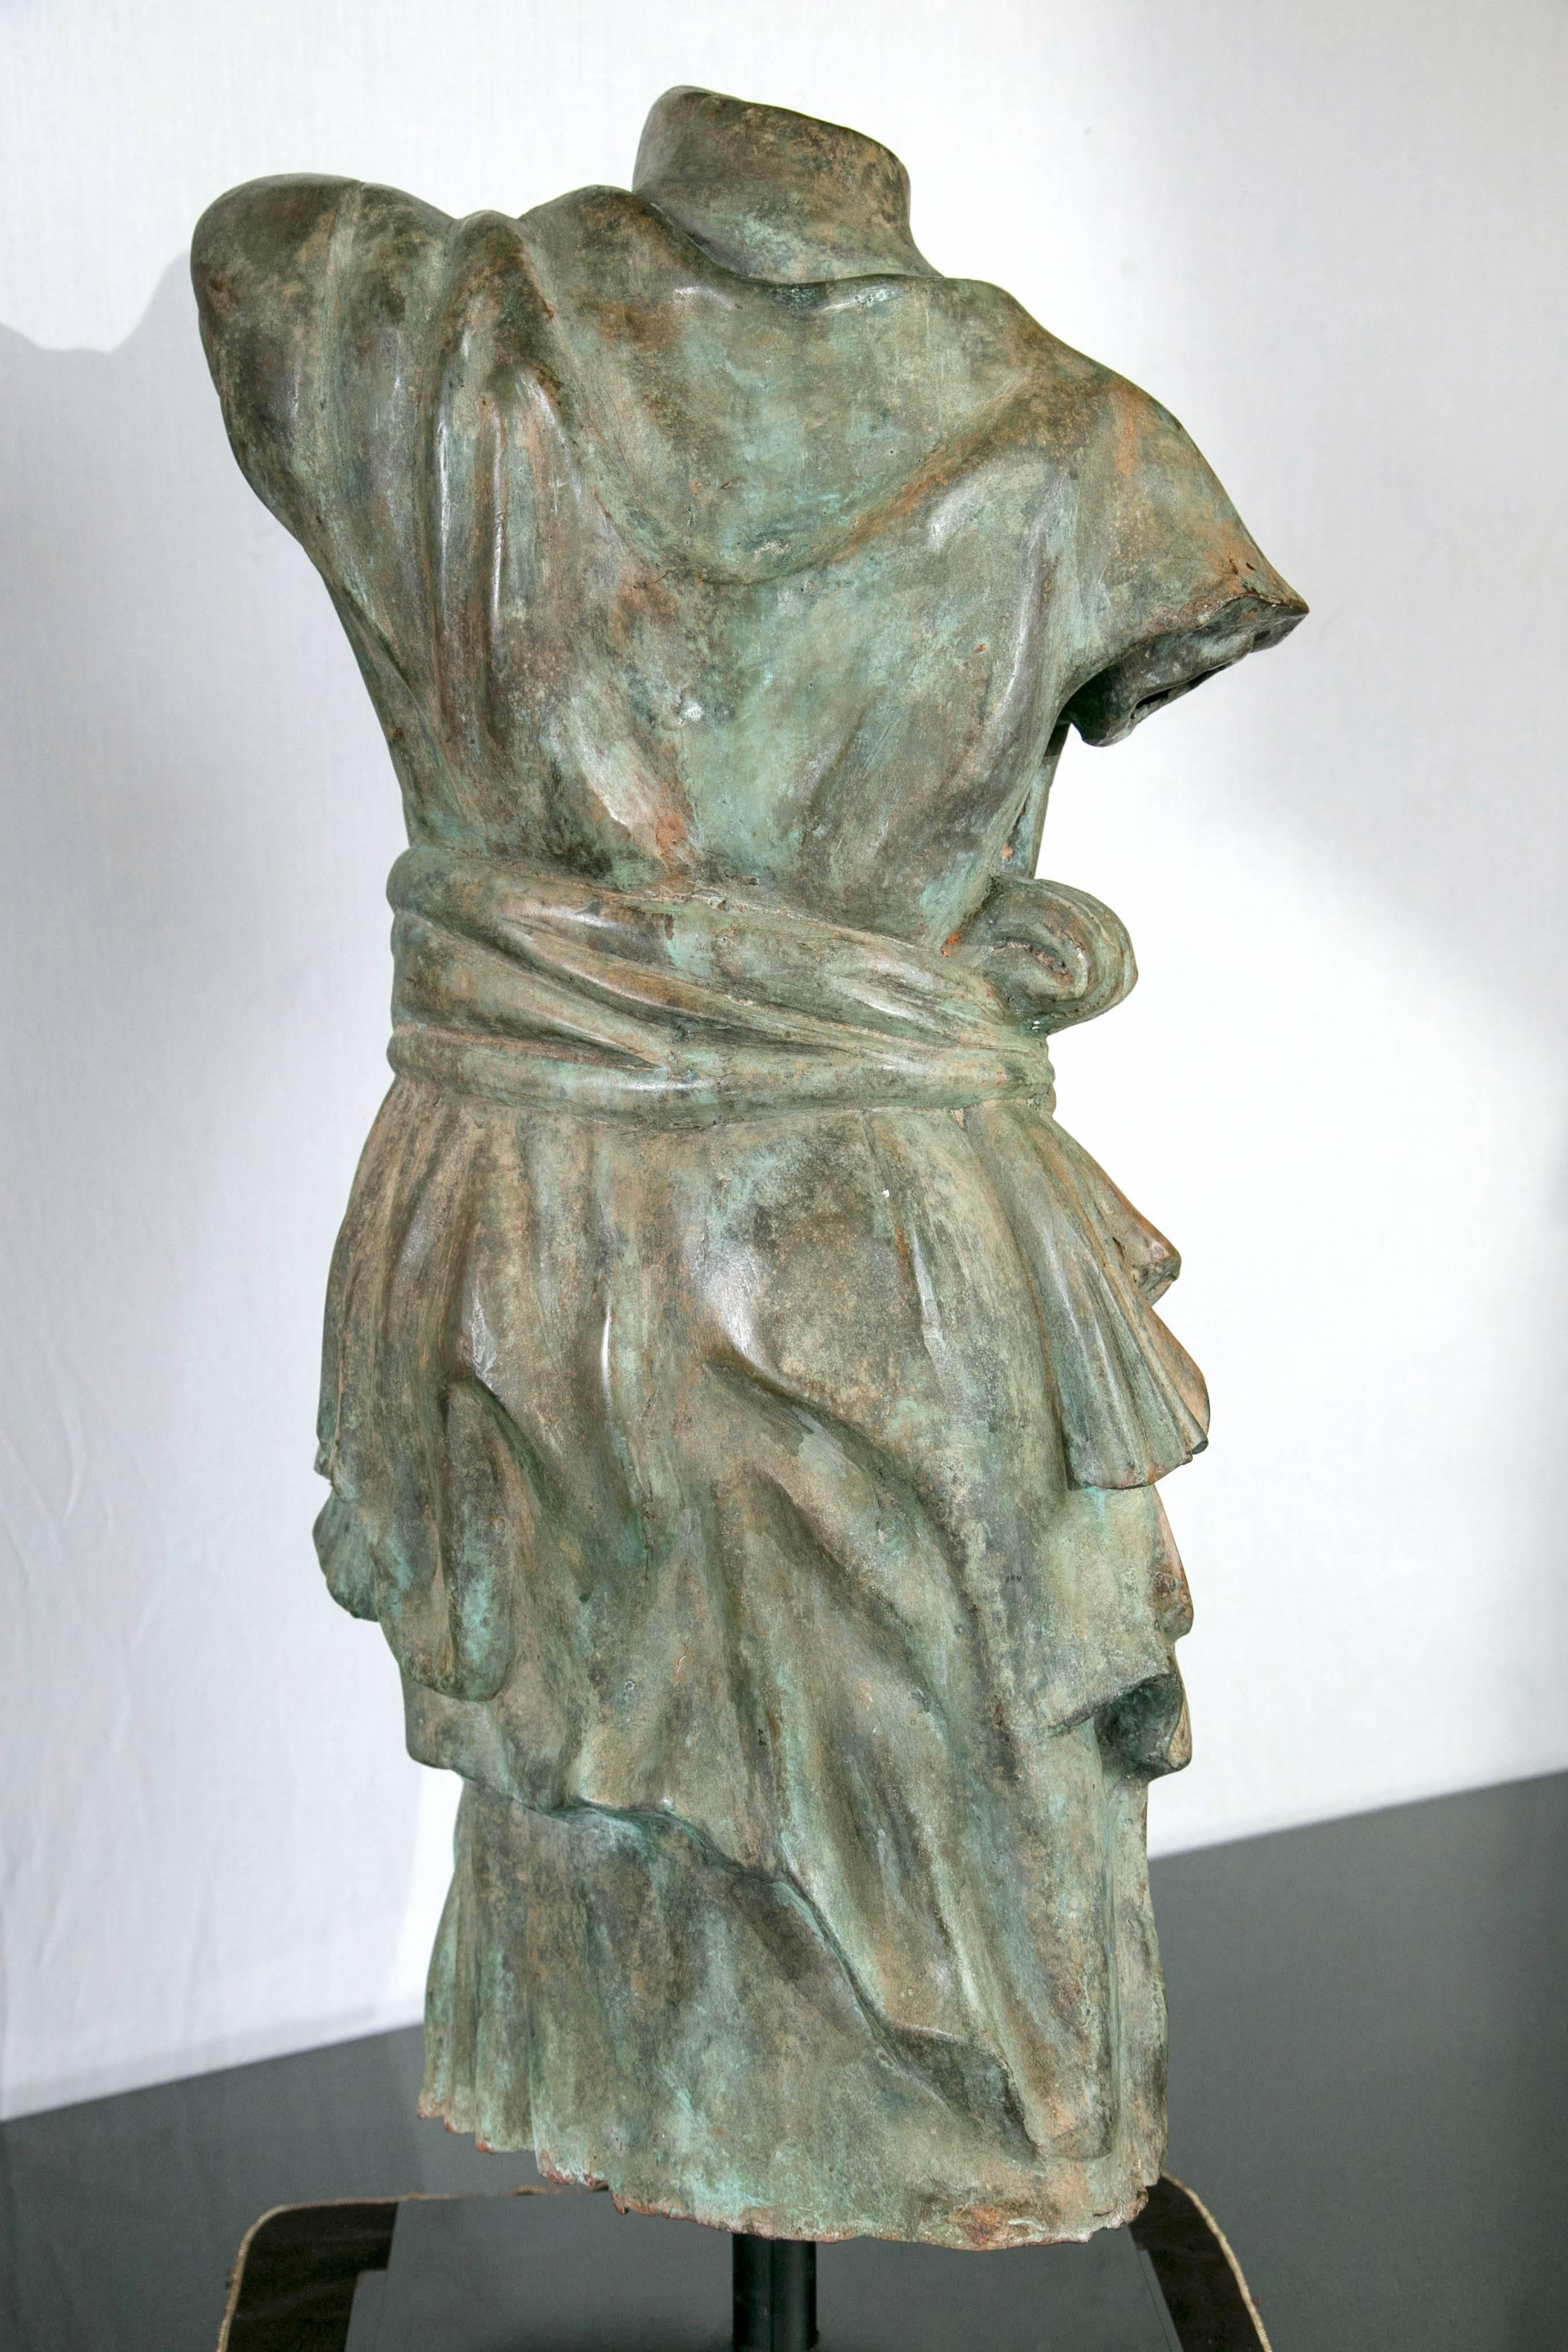 Cast Draped Female Torso in Bronze, after the Antique